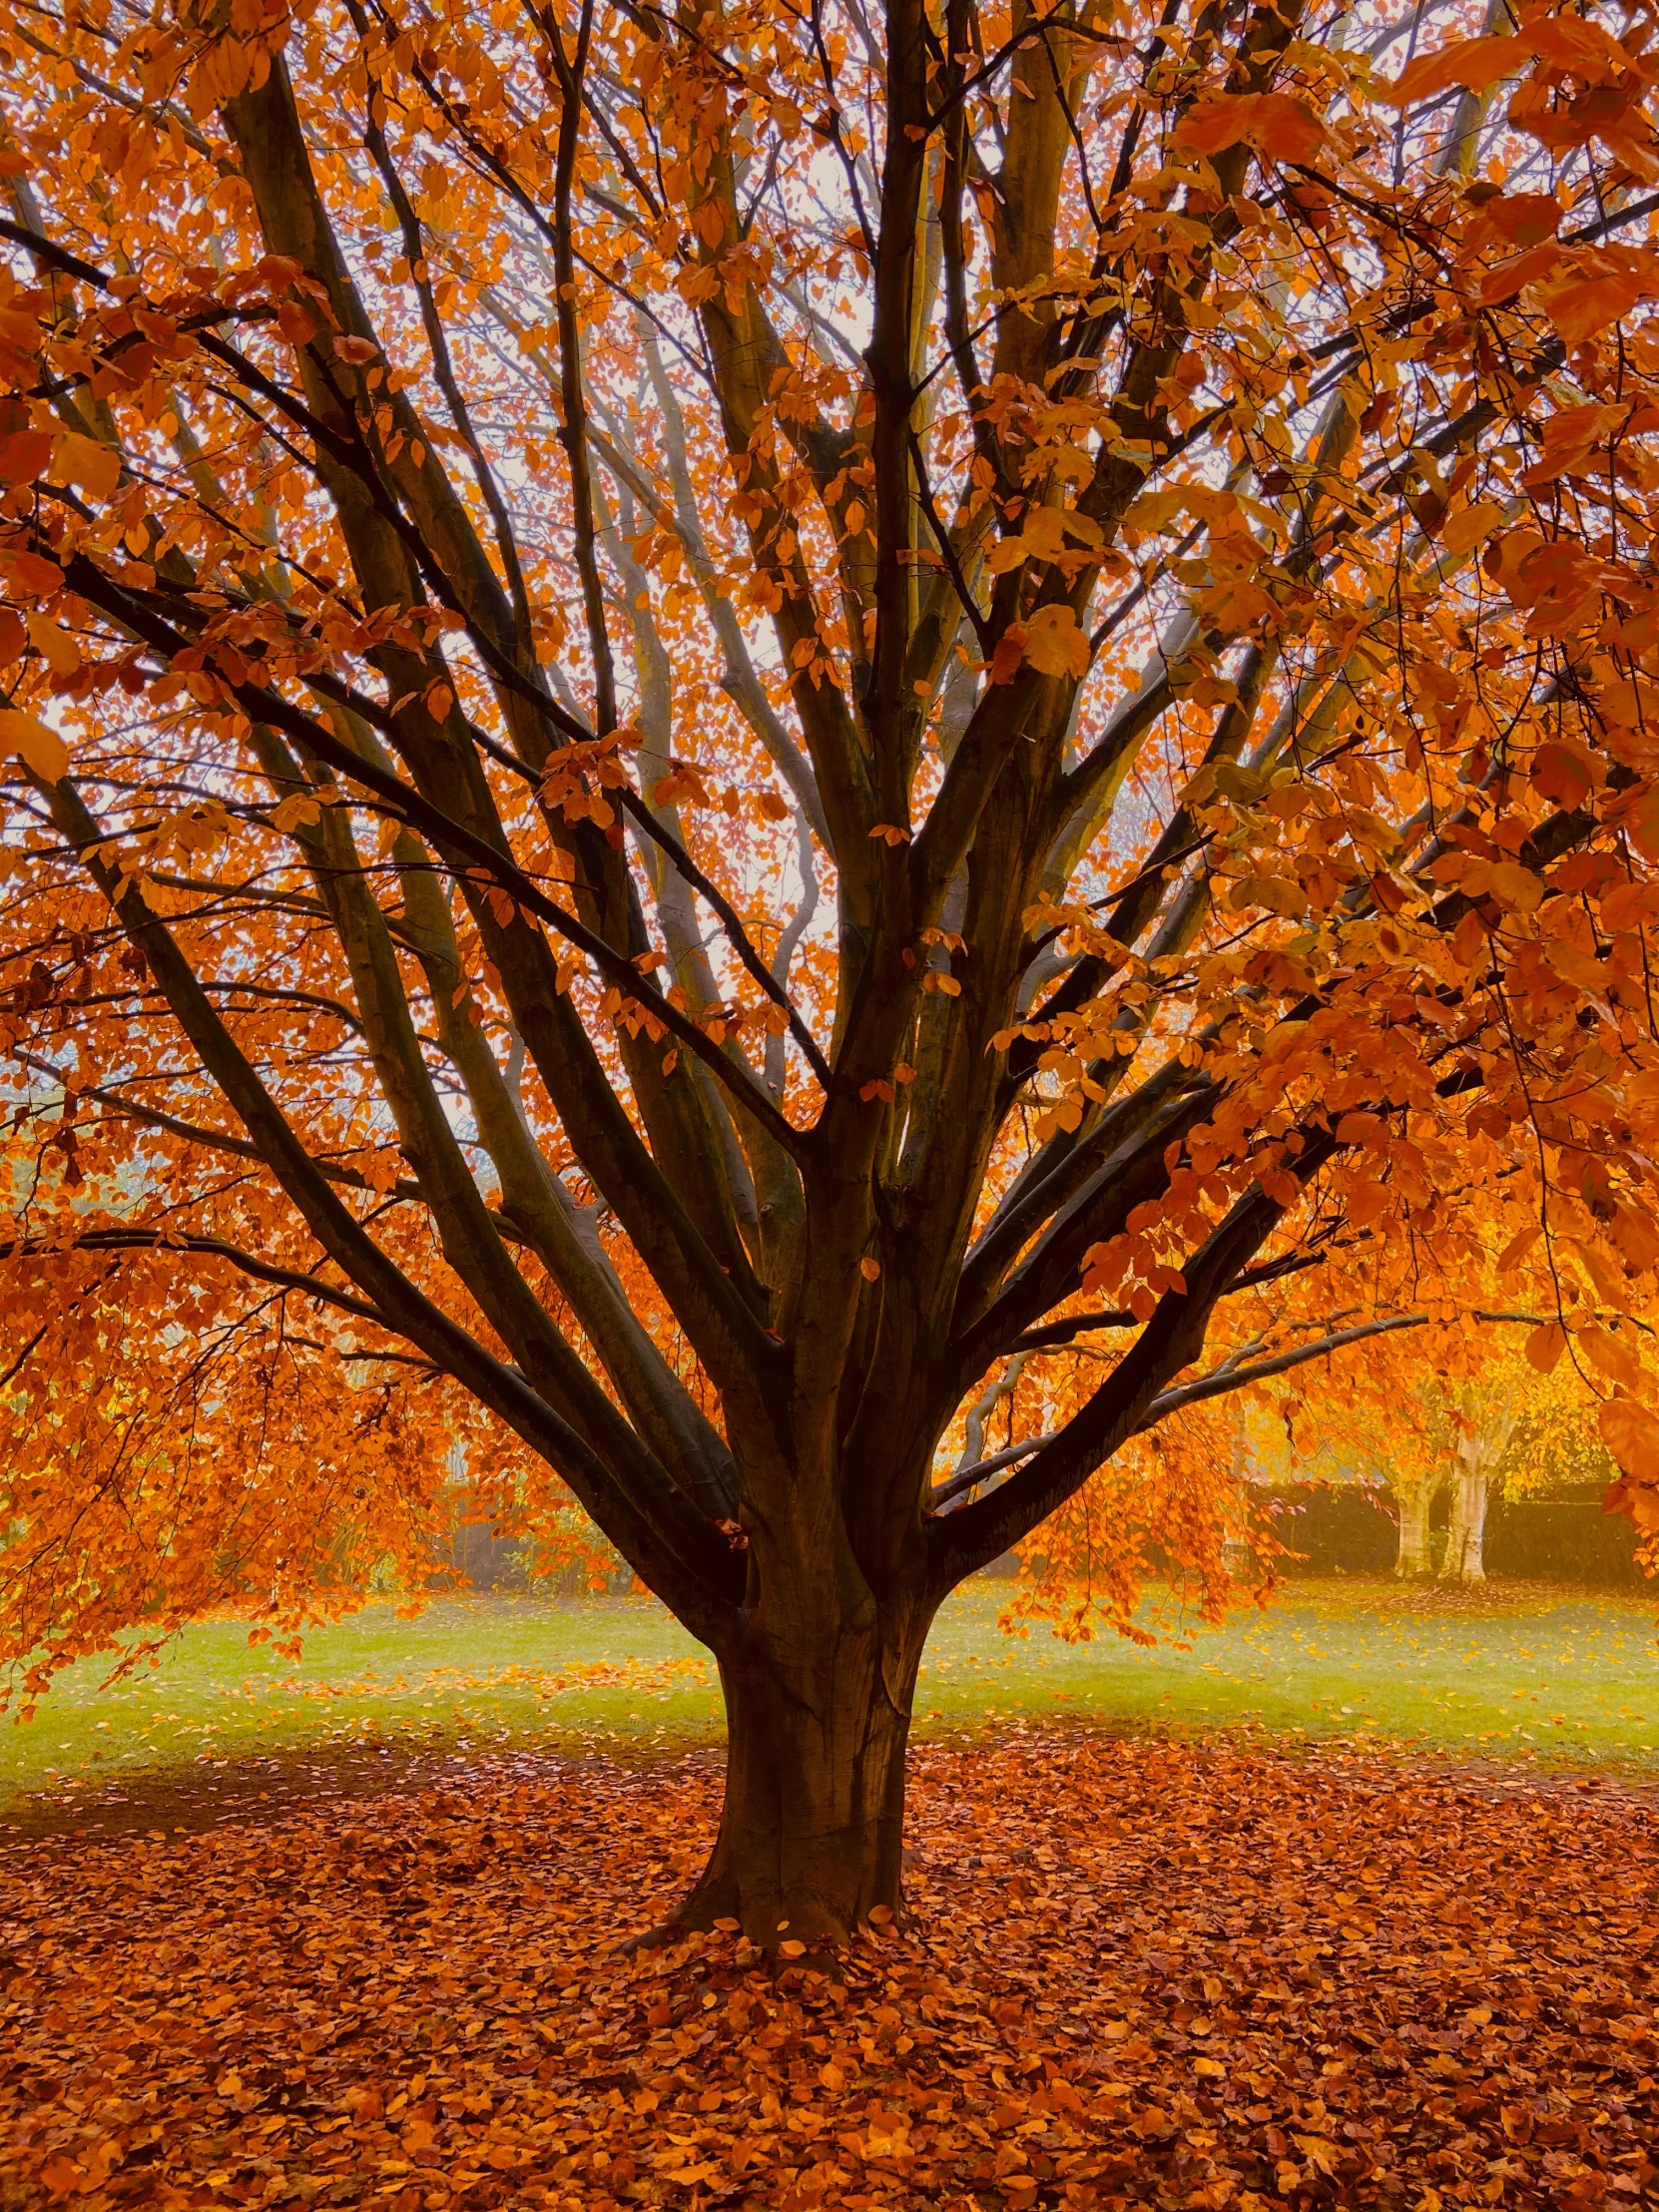 an image of a tree that has fallen leaves